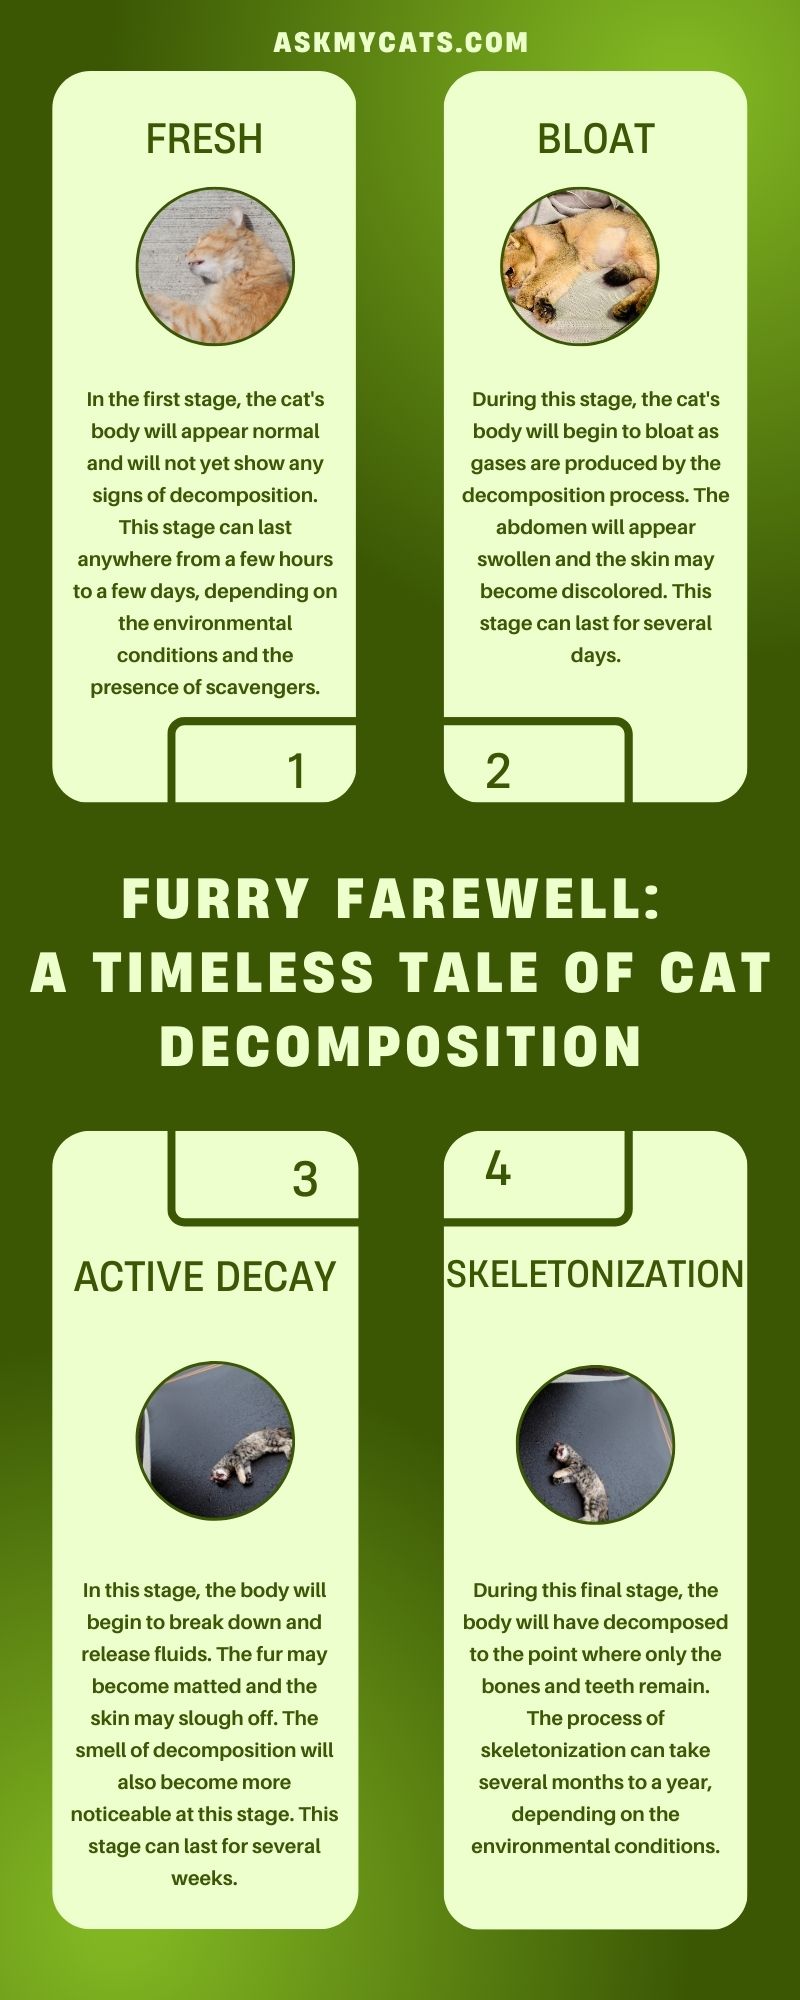 Furry Farewell: A Timeless Tale of Cat Decomposition (Infographic)